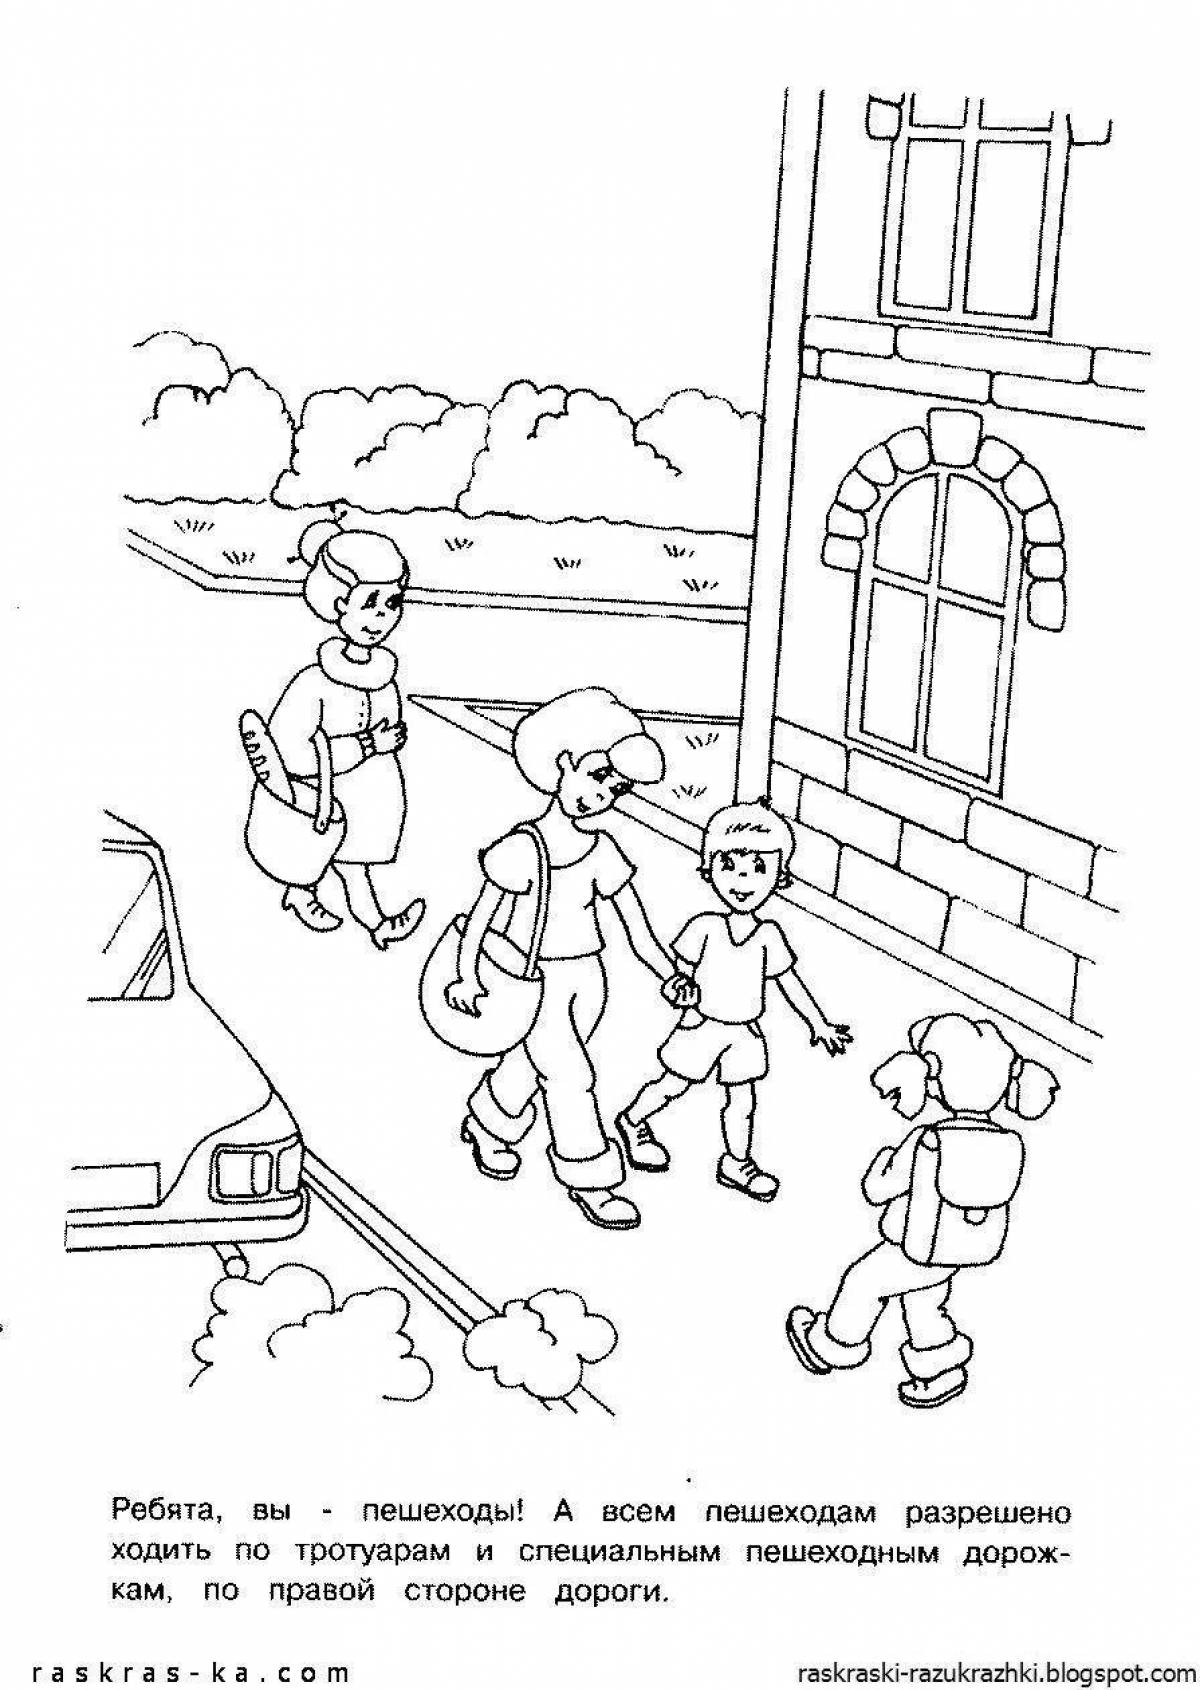 Playful safety rules coloring page